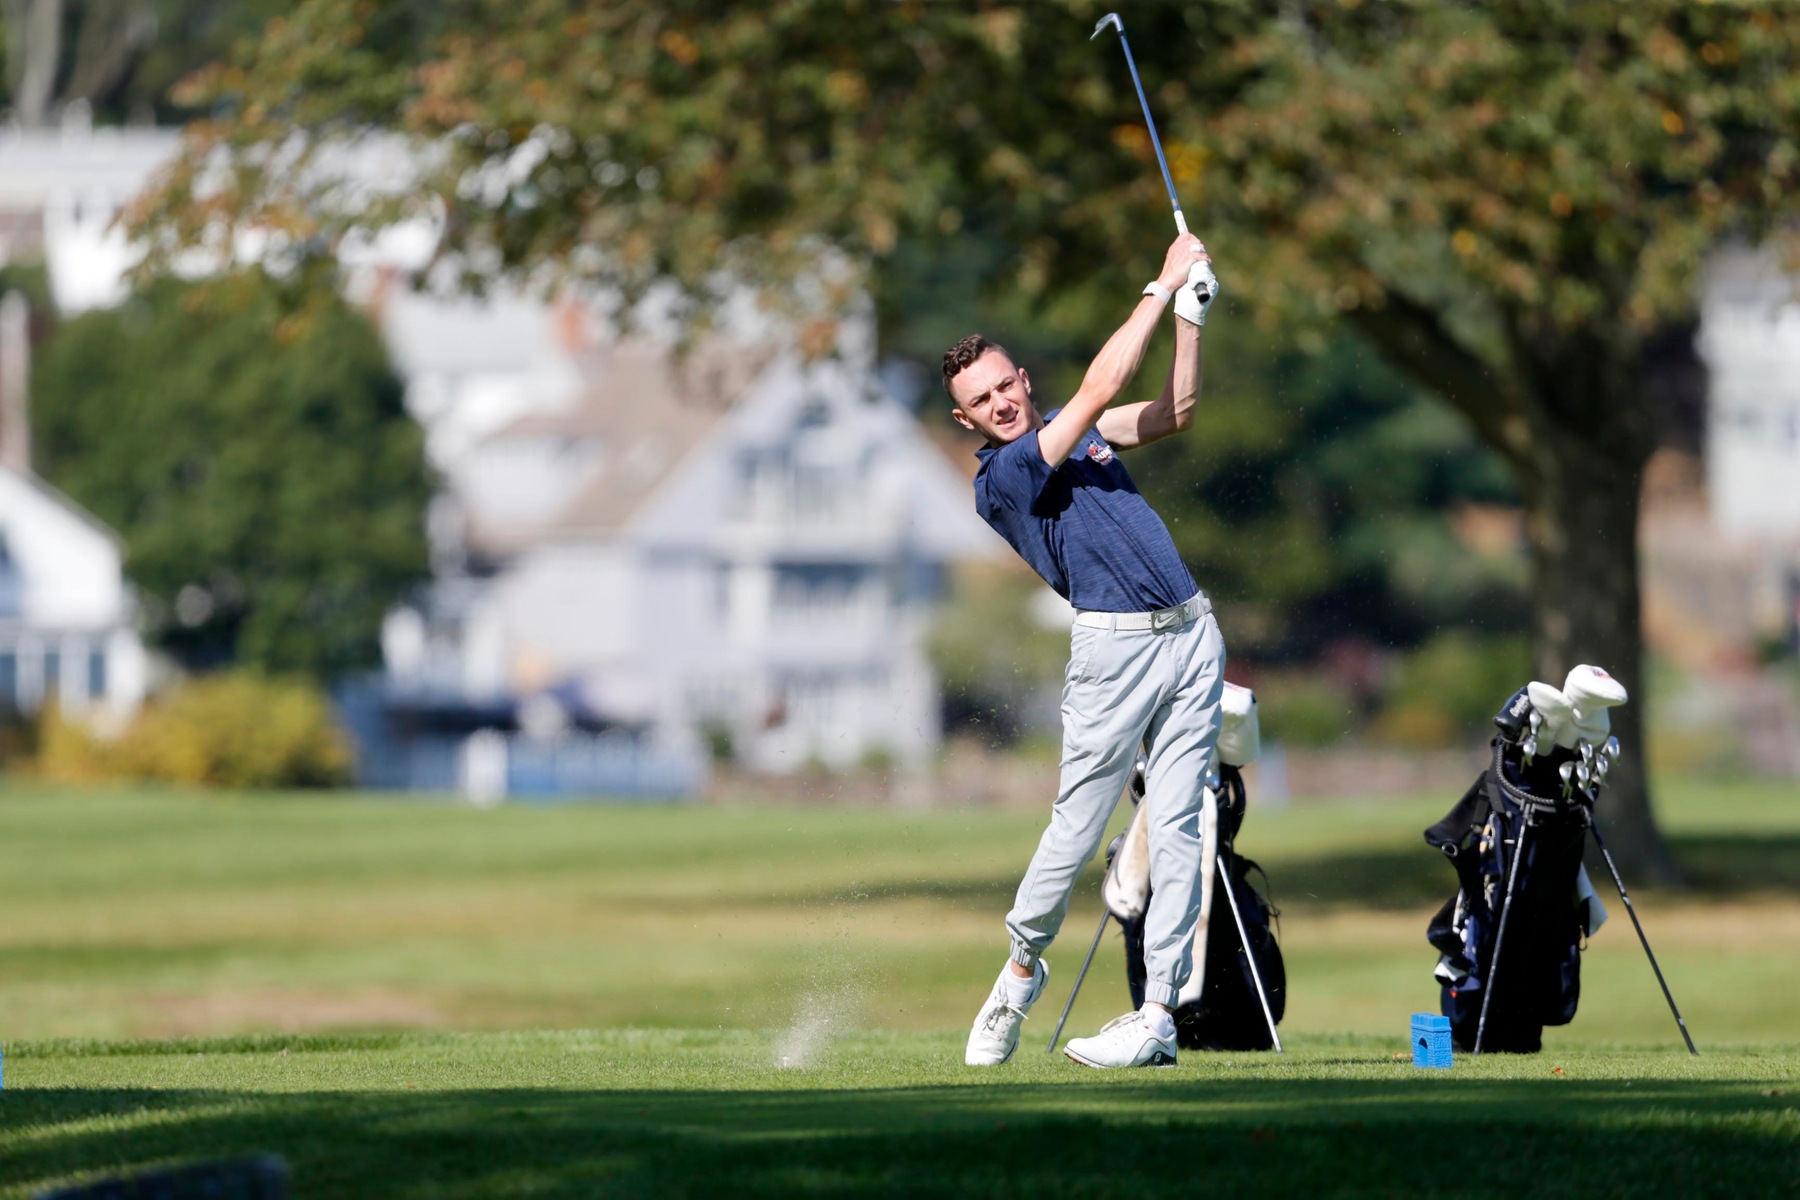 Salem State Places 11th at 85th NEIGA Championship